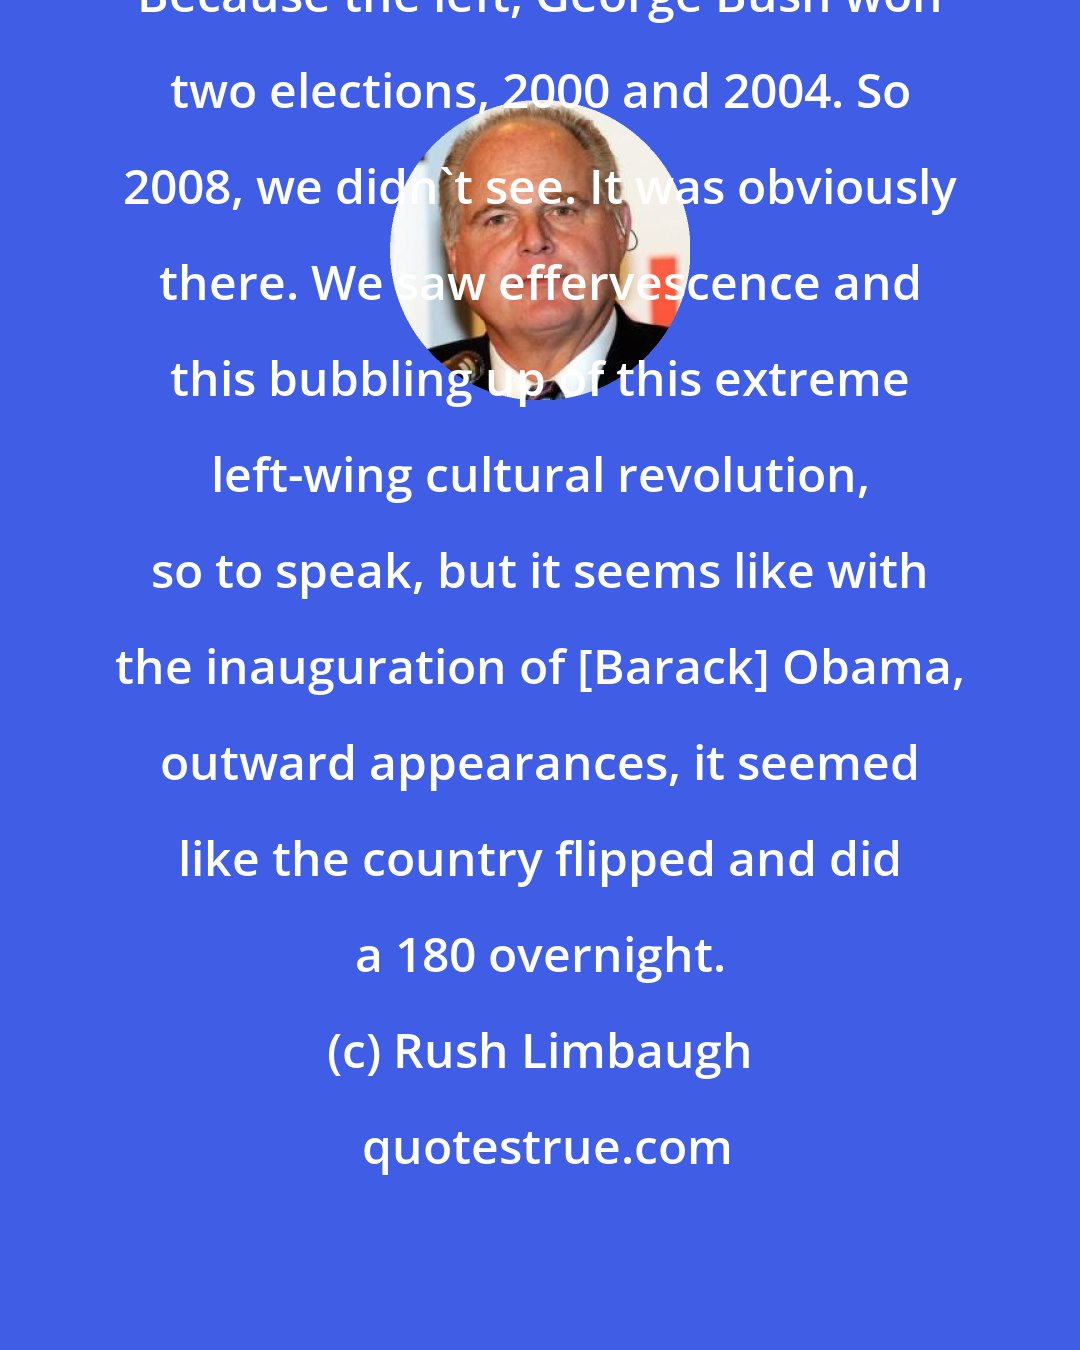 Rush Limbaugh: Because the left, George Bush won two elections, 2000 and 2004. So 2008, we didn't see. It was obviously there. We saw effervescence and this bubbling up of this extreme left-wing cultural revolution, so to speak, but it seems like with the inauguration of [Barack] Obama, outward appearances, it seemed like the country flipped and did a 180 overnight.